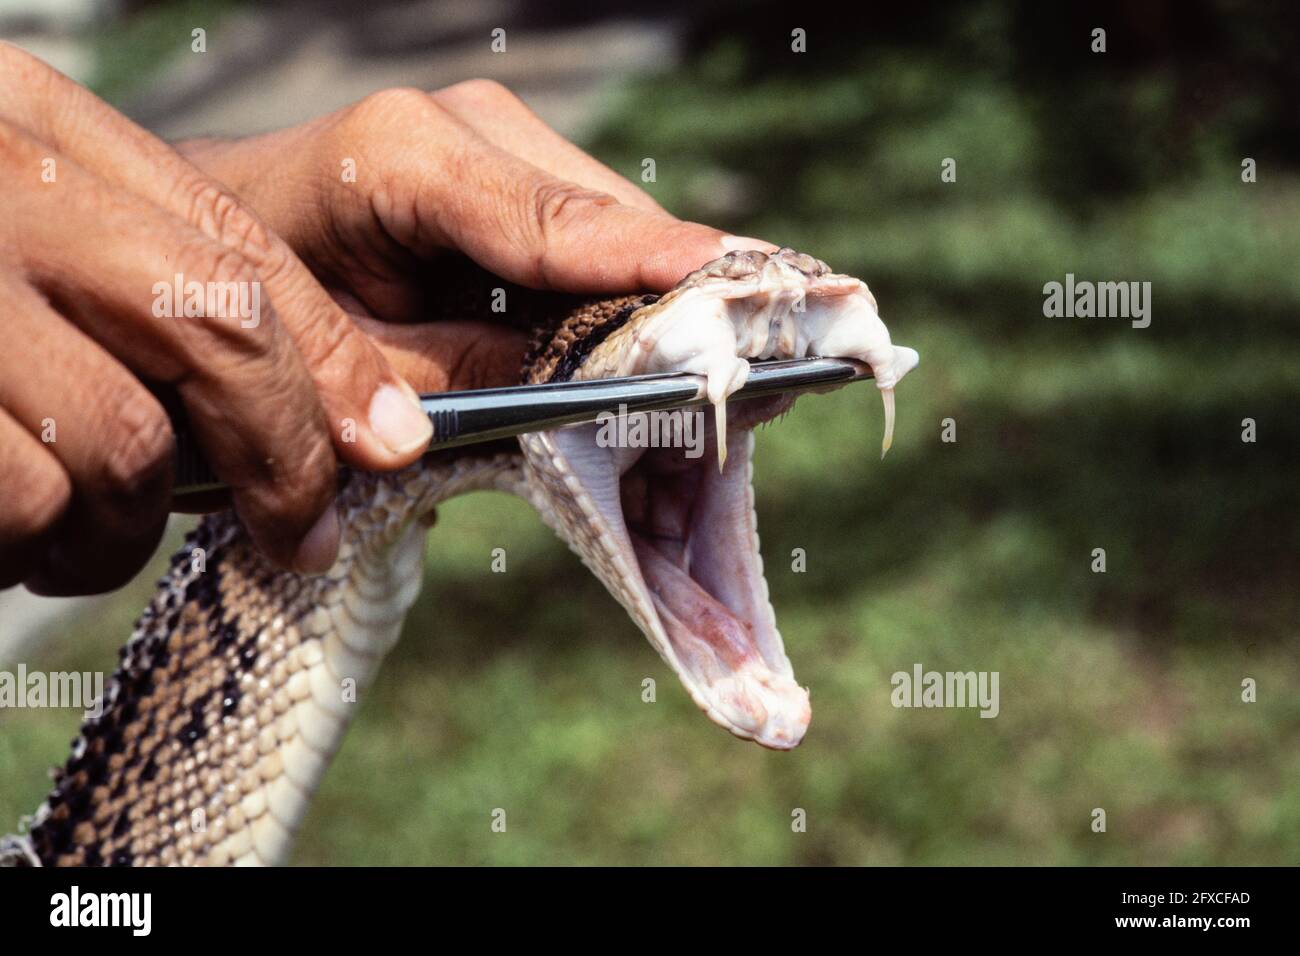 Central American Bushmaster in Panama.  A worker is preparing to milk the snake for venom and showing the fangs. Stock Photo